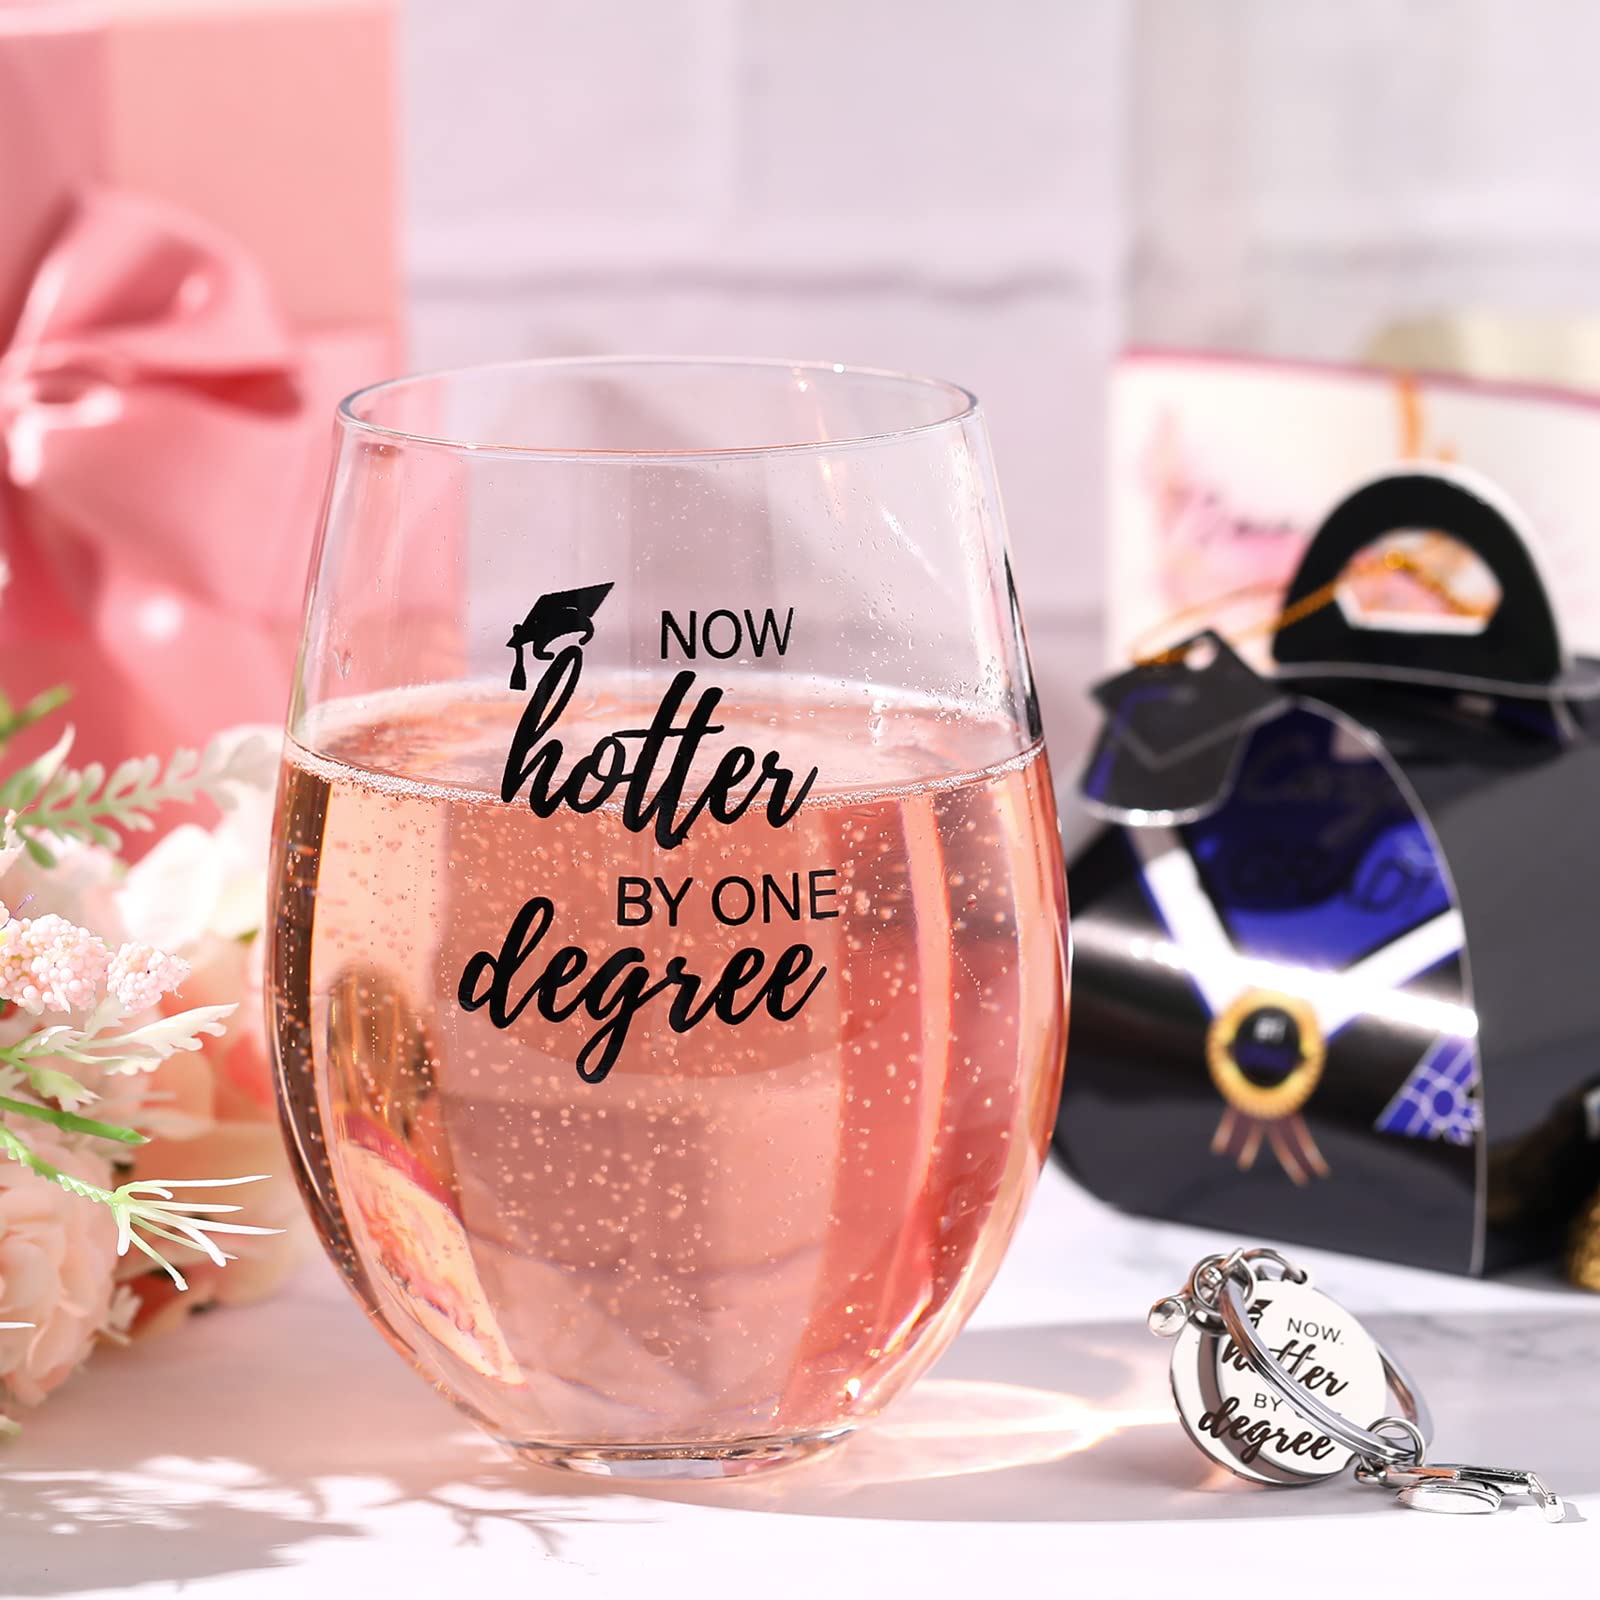 2024 Graduation Wine Glass Gift Set, Including Now Hotter by One Degree 15 oz Stemless Wine Glass and Funny Graduation Keychain Congratulation Gift for Him College High School Graduates Masters Her